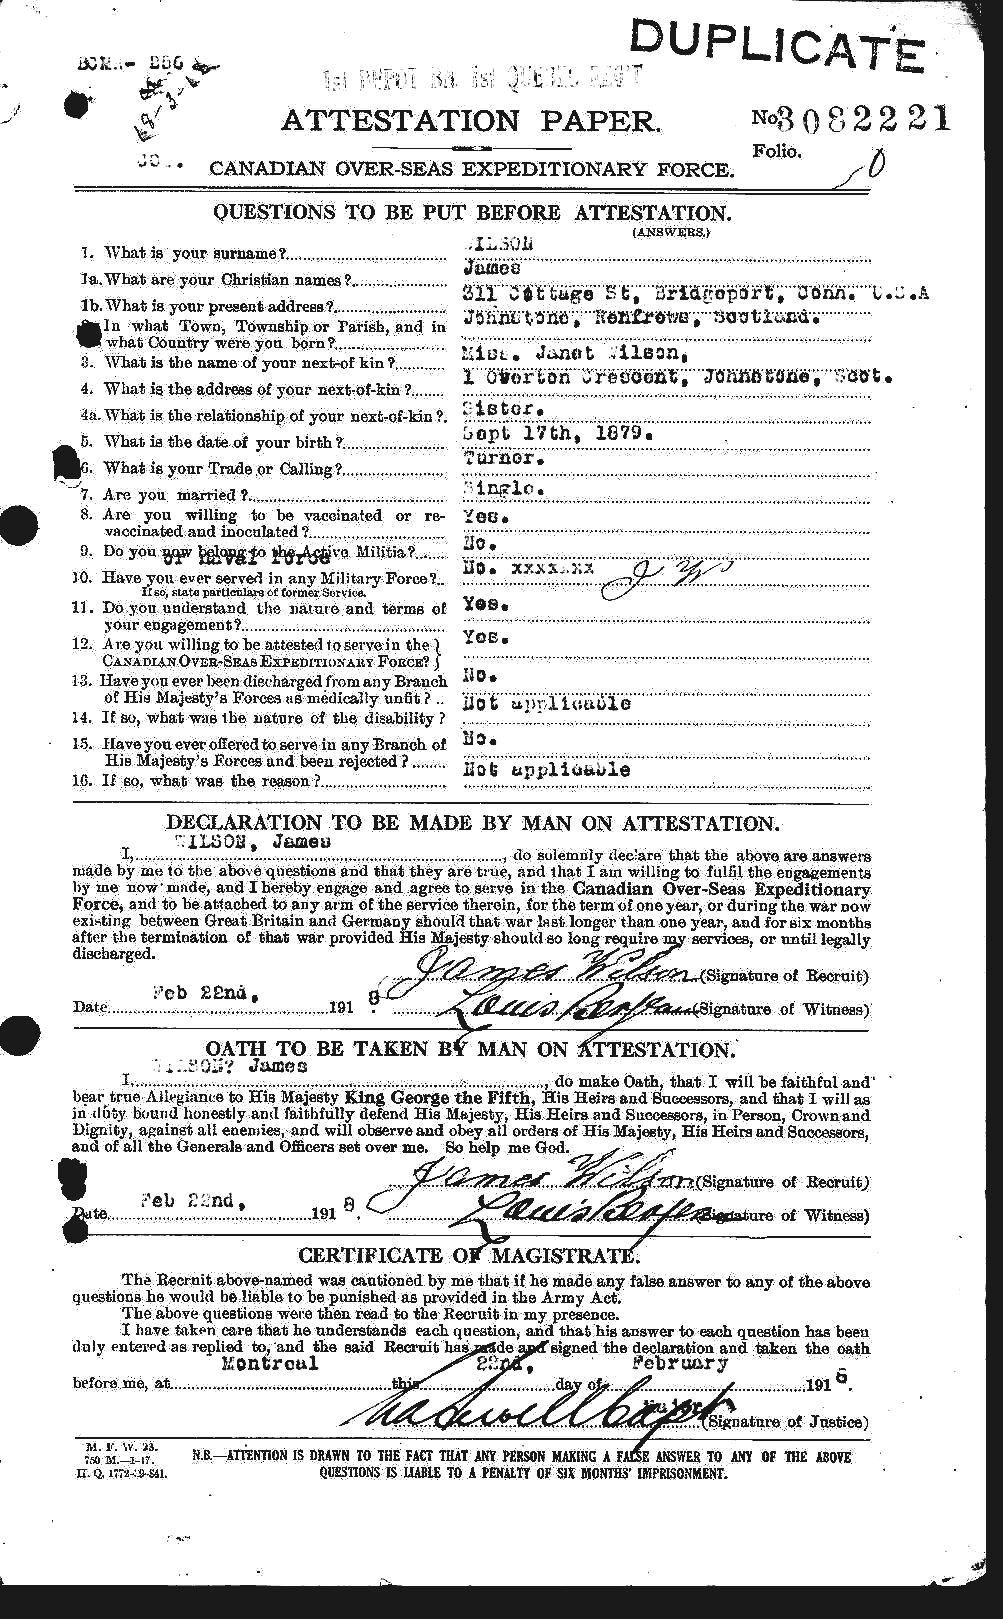 Personnel Records of the First World War - CEF 681404a